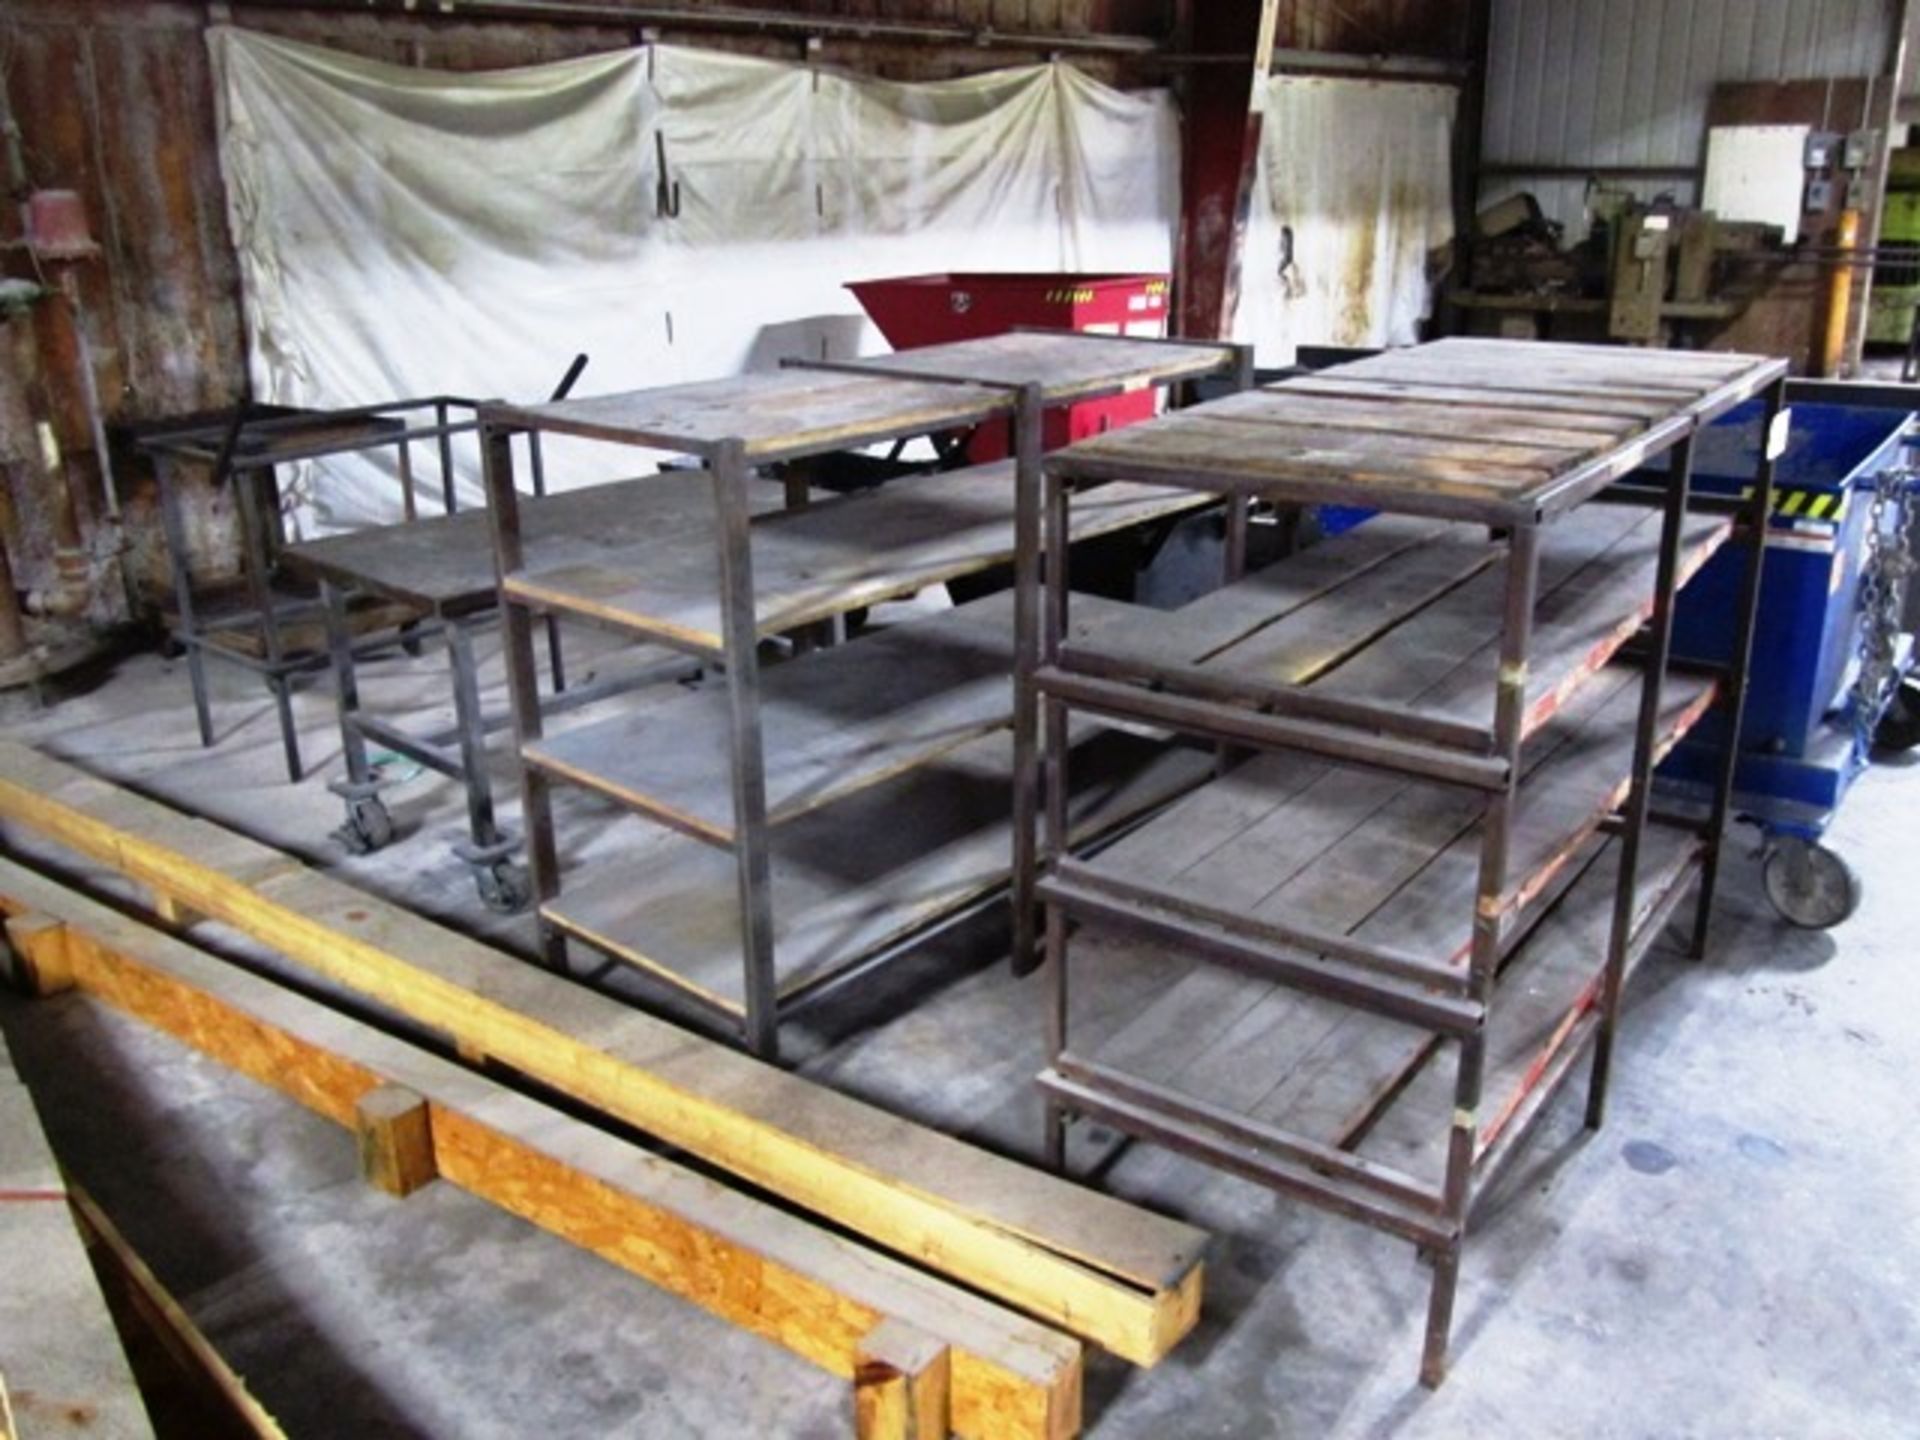 Assorted Shelves, Portable Tables